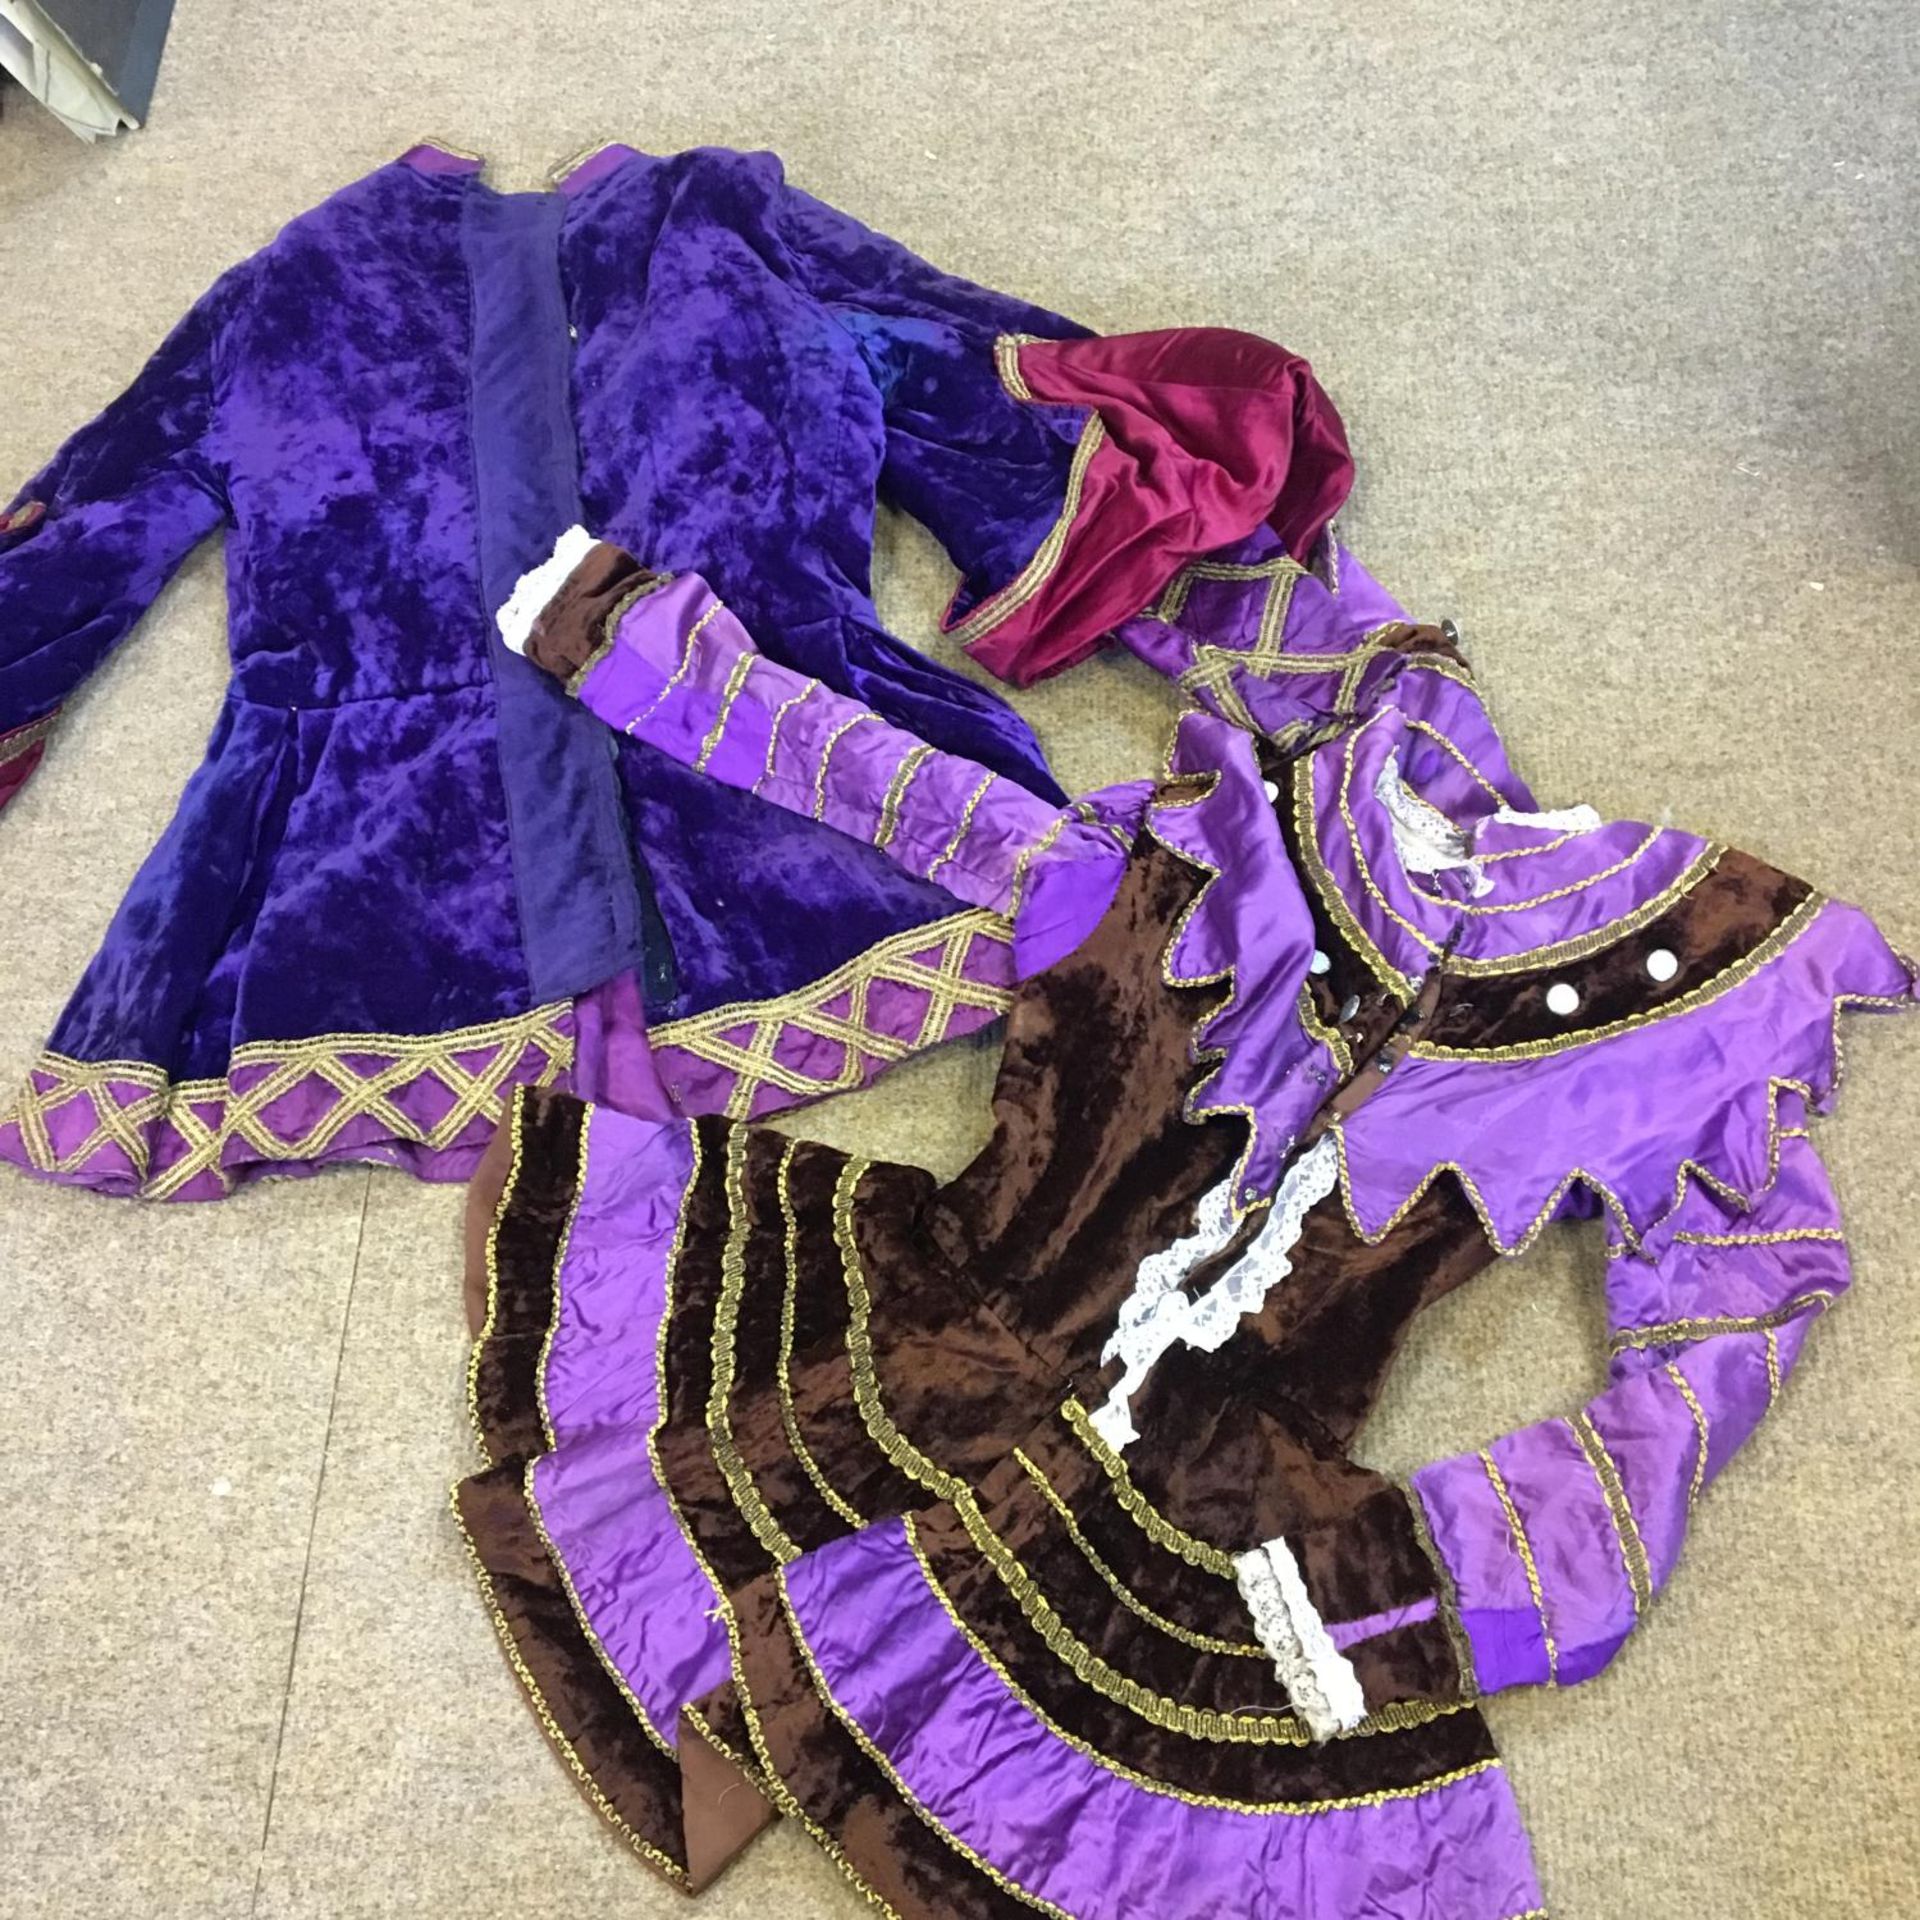 2 x velvet Medieval style theatre costumes. Includes Free UK delivery.